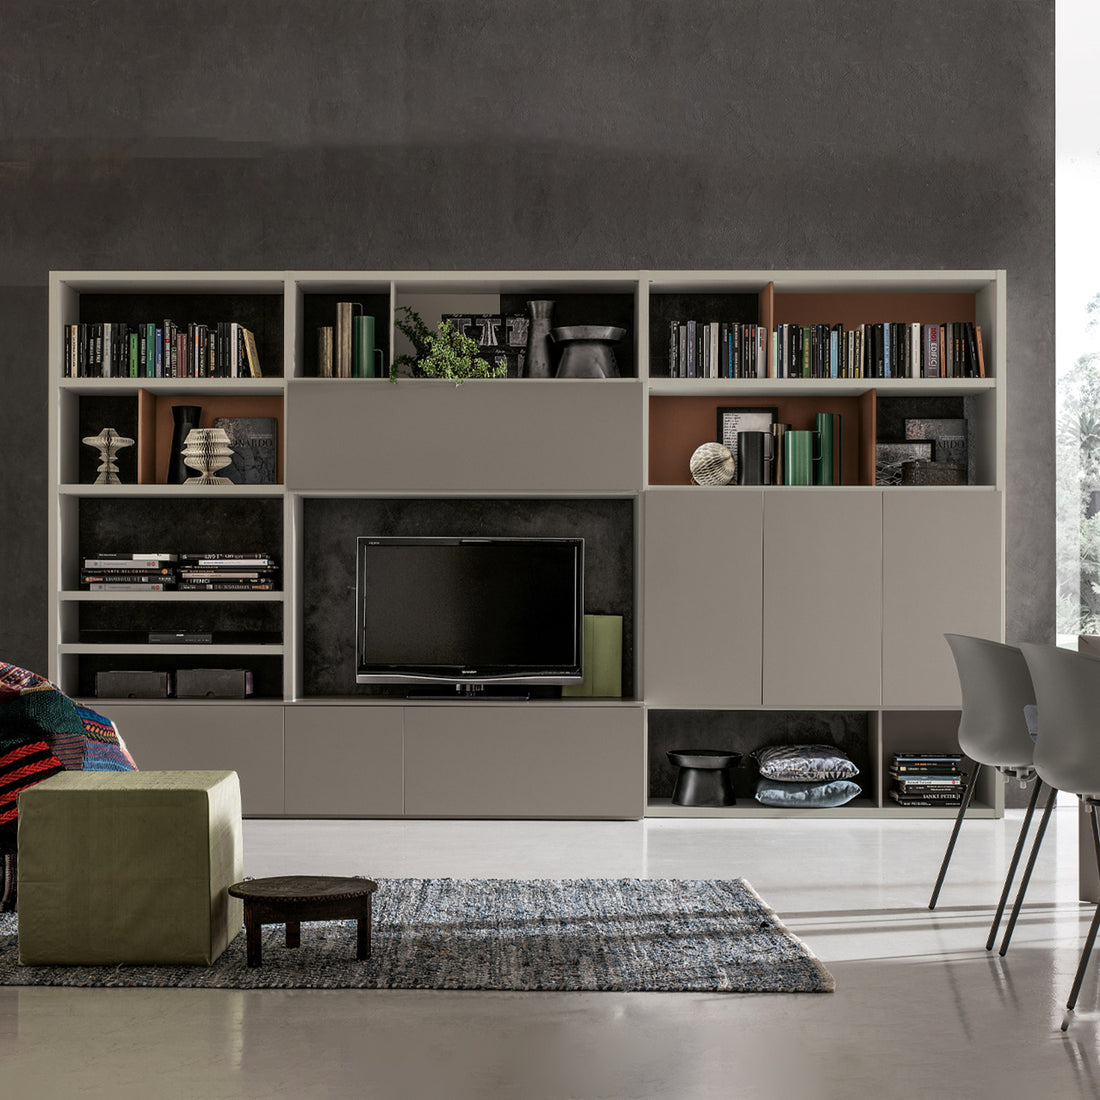 7 Perks of Putting Modern Bookcases in Your Home